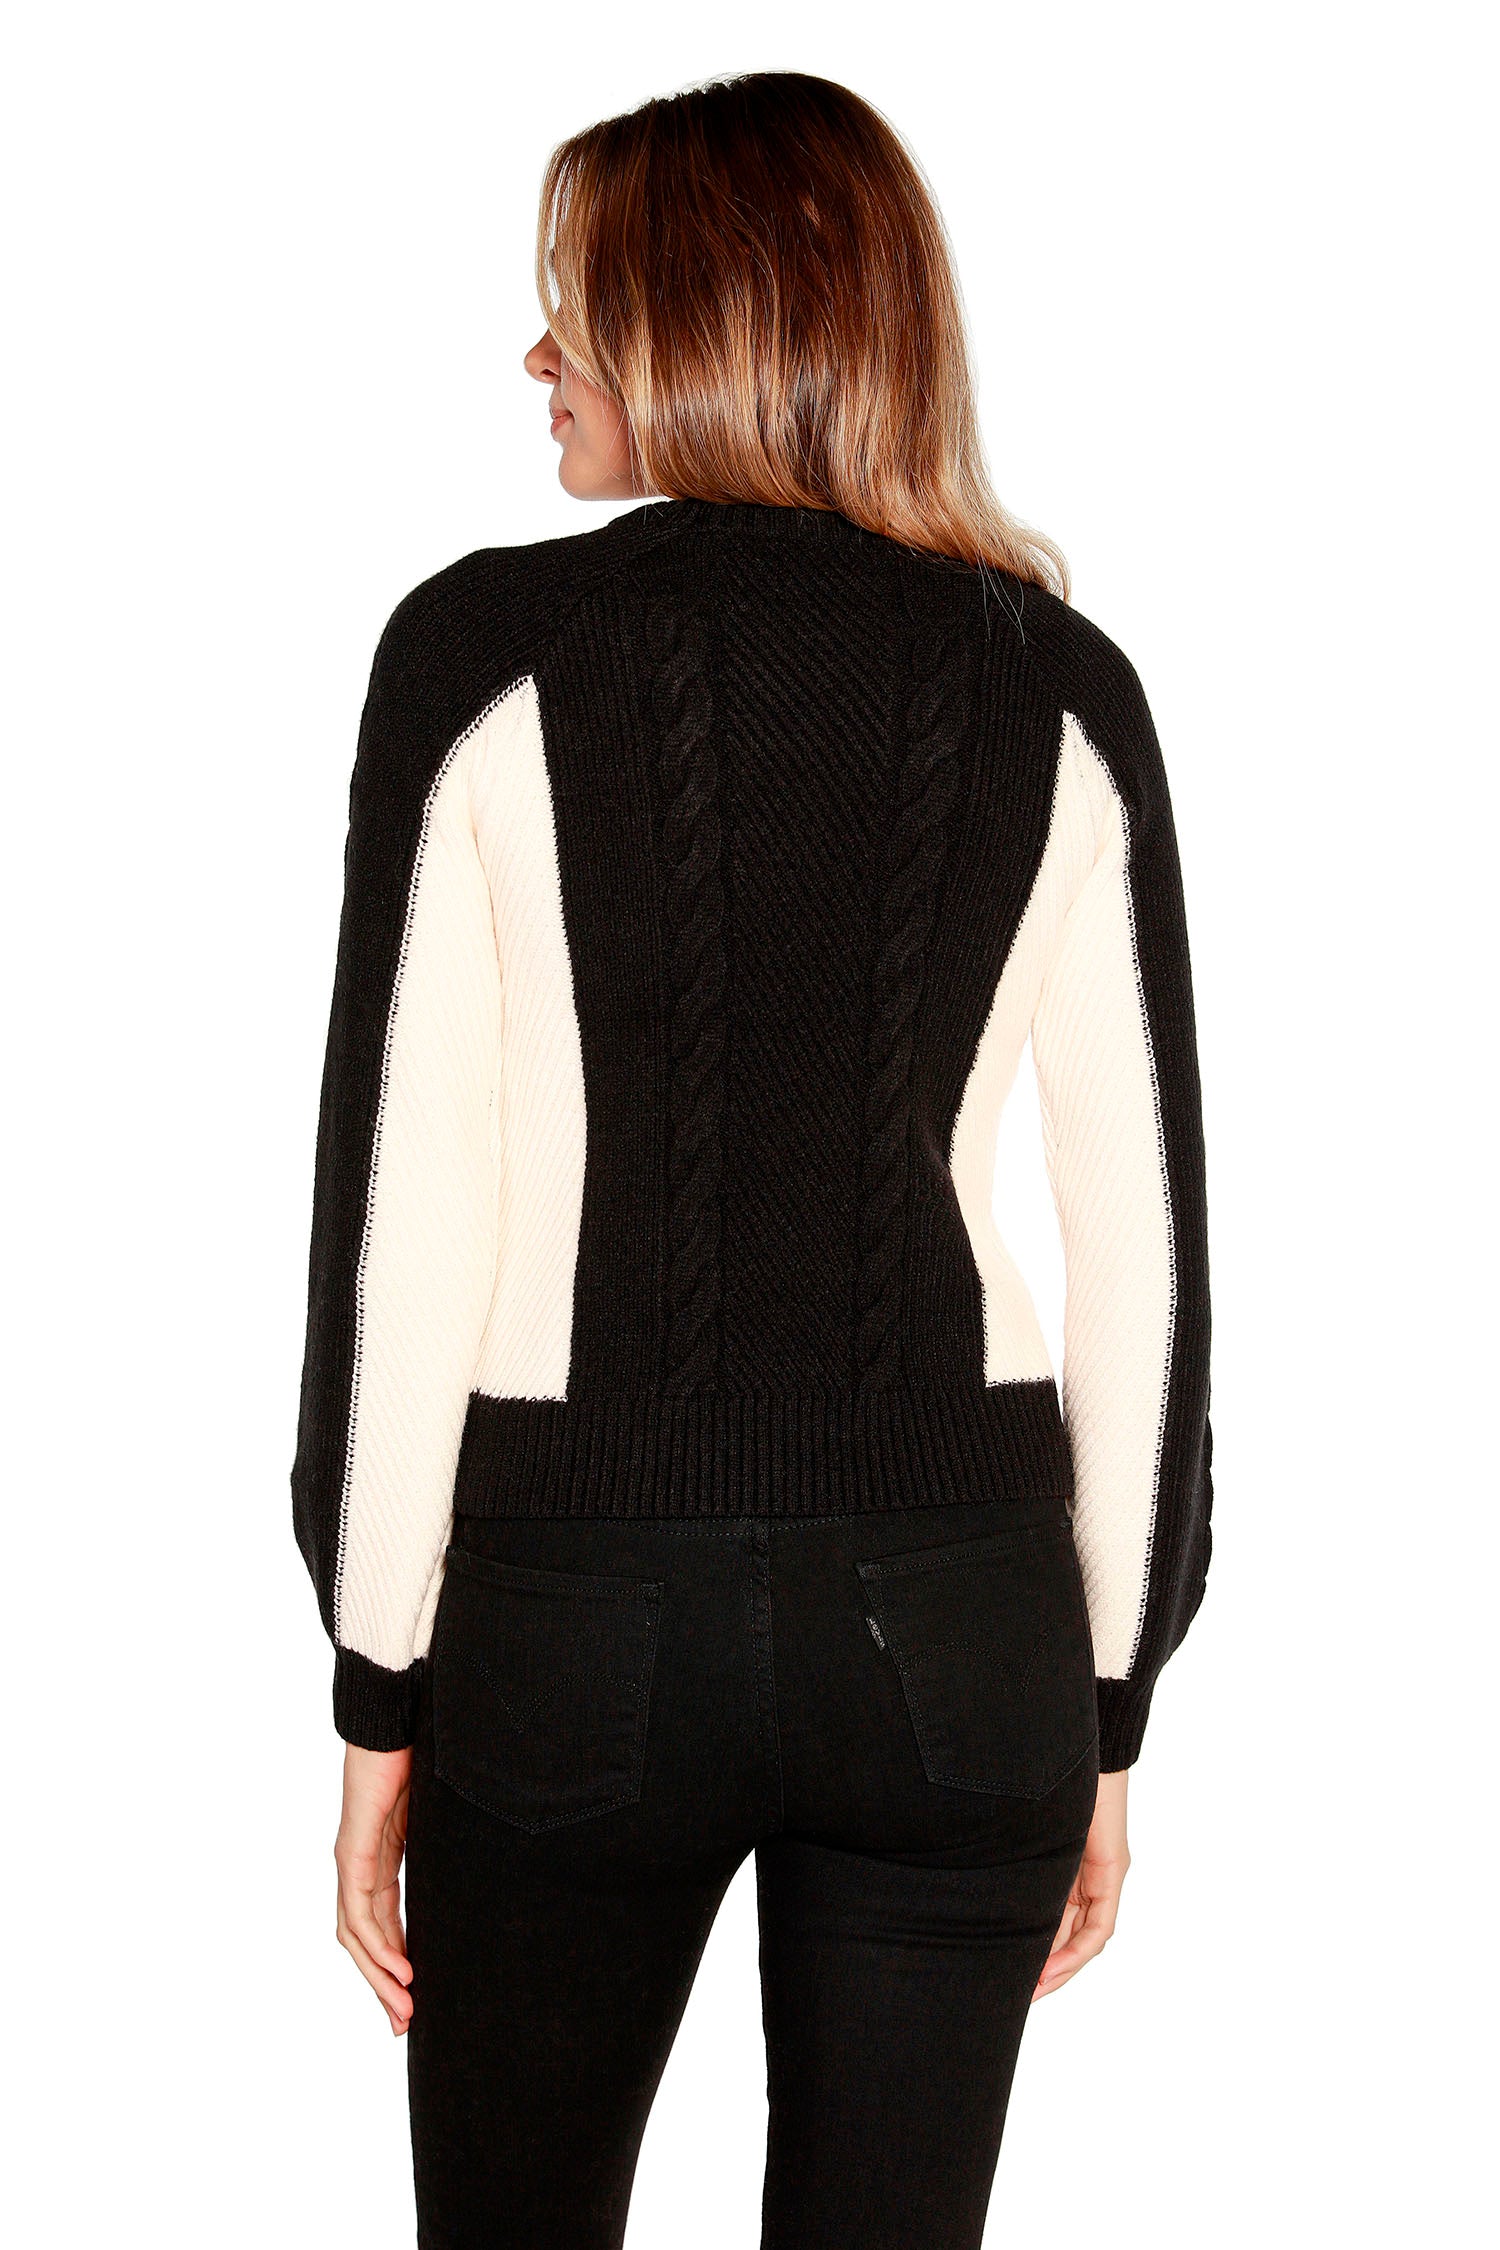 Women's Dramatic Color Blocked Sweater with Gold Button Detail